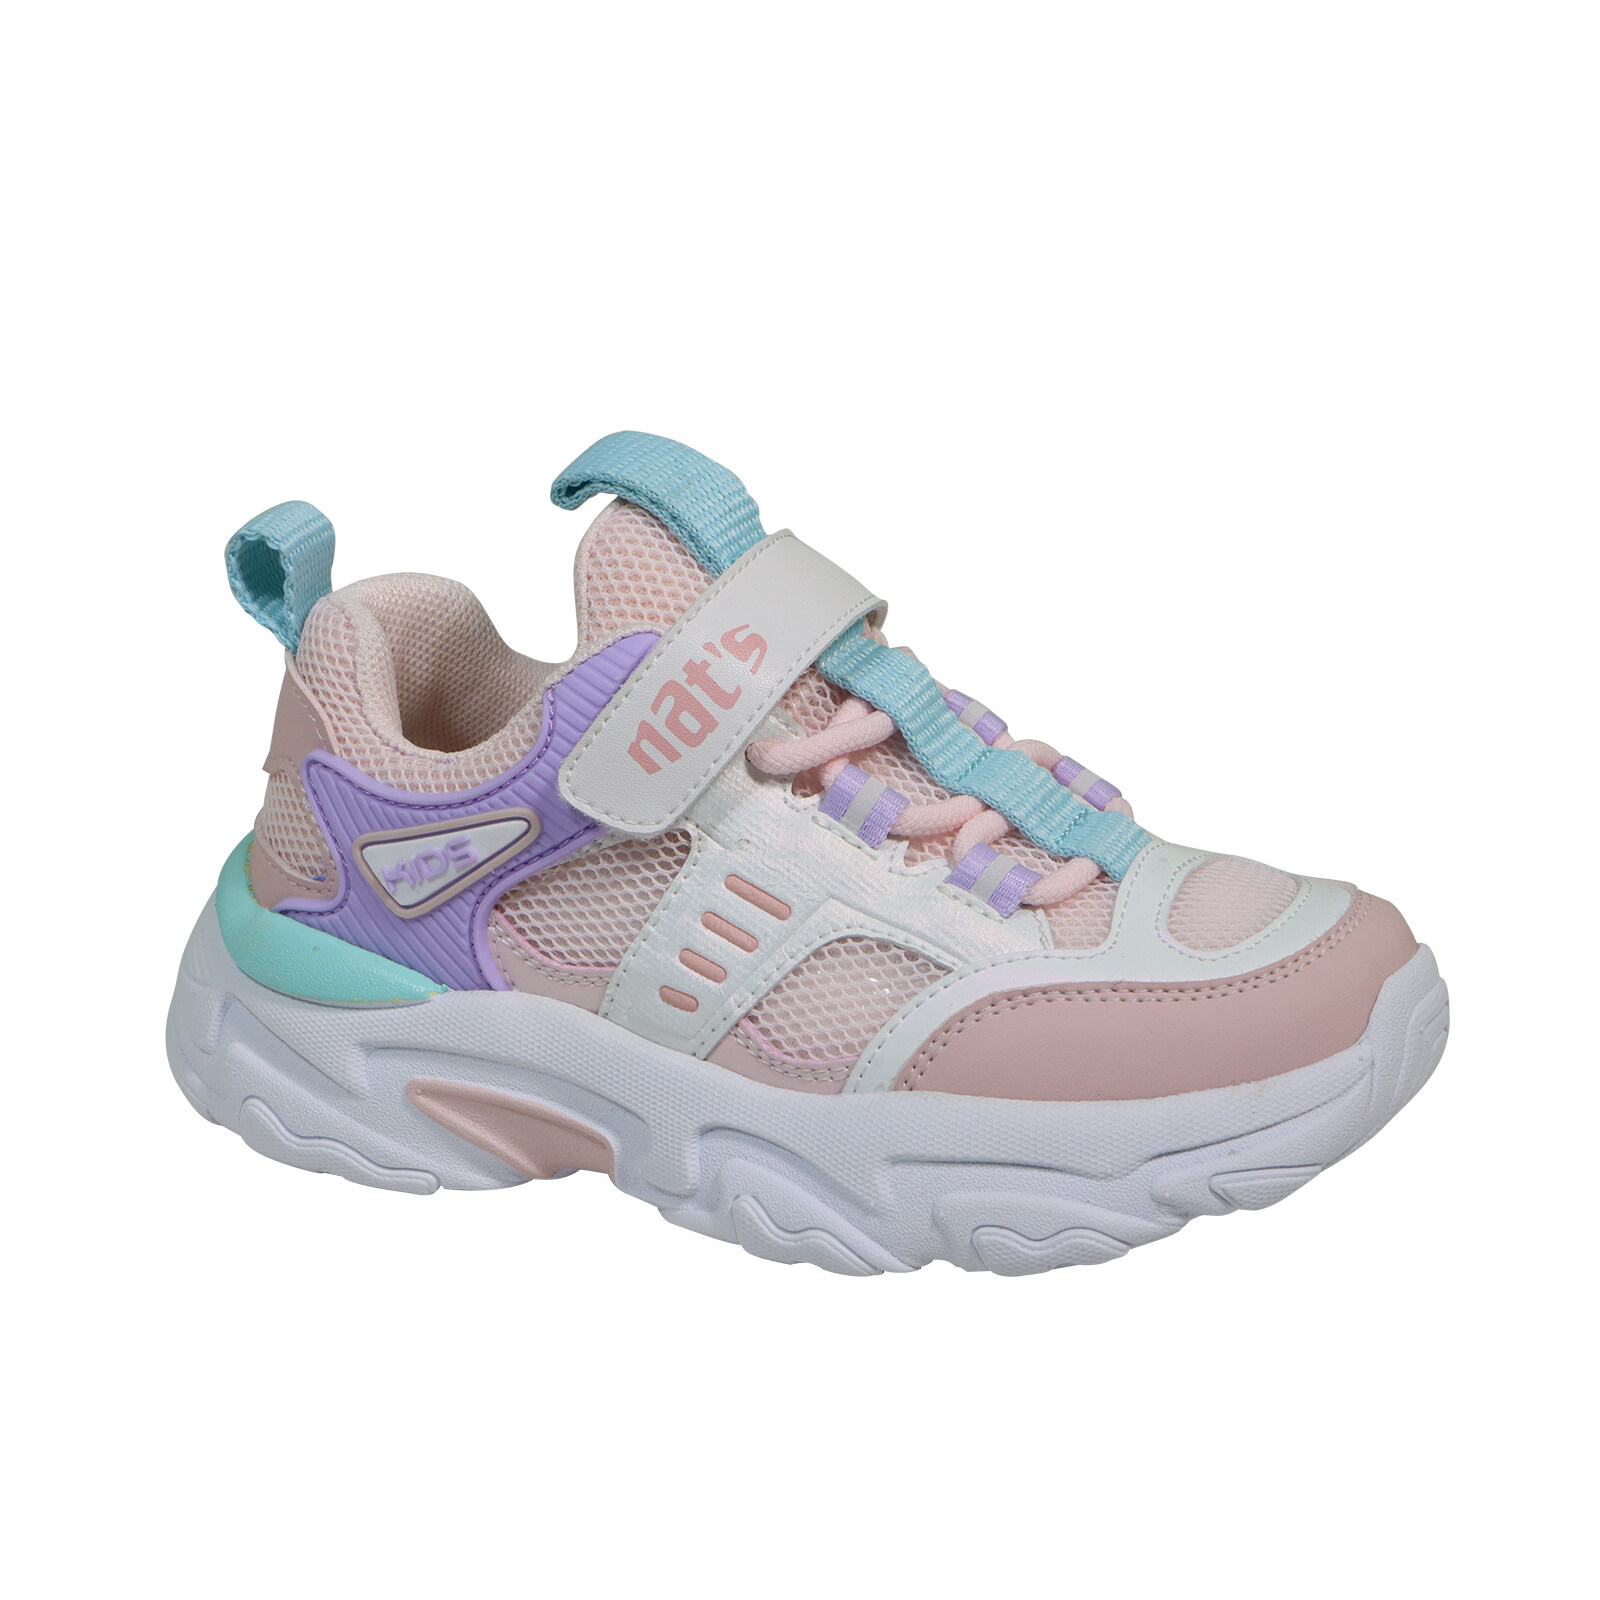 2023 Children Sneakers High Quality Sports Shoes